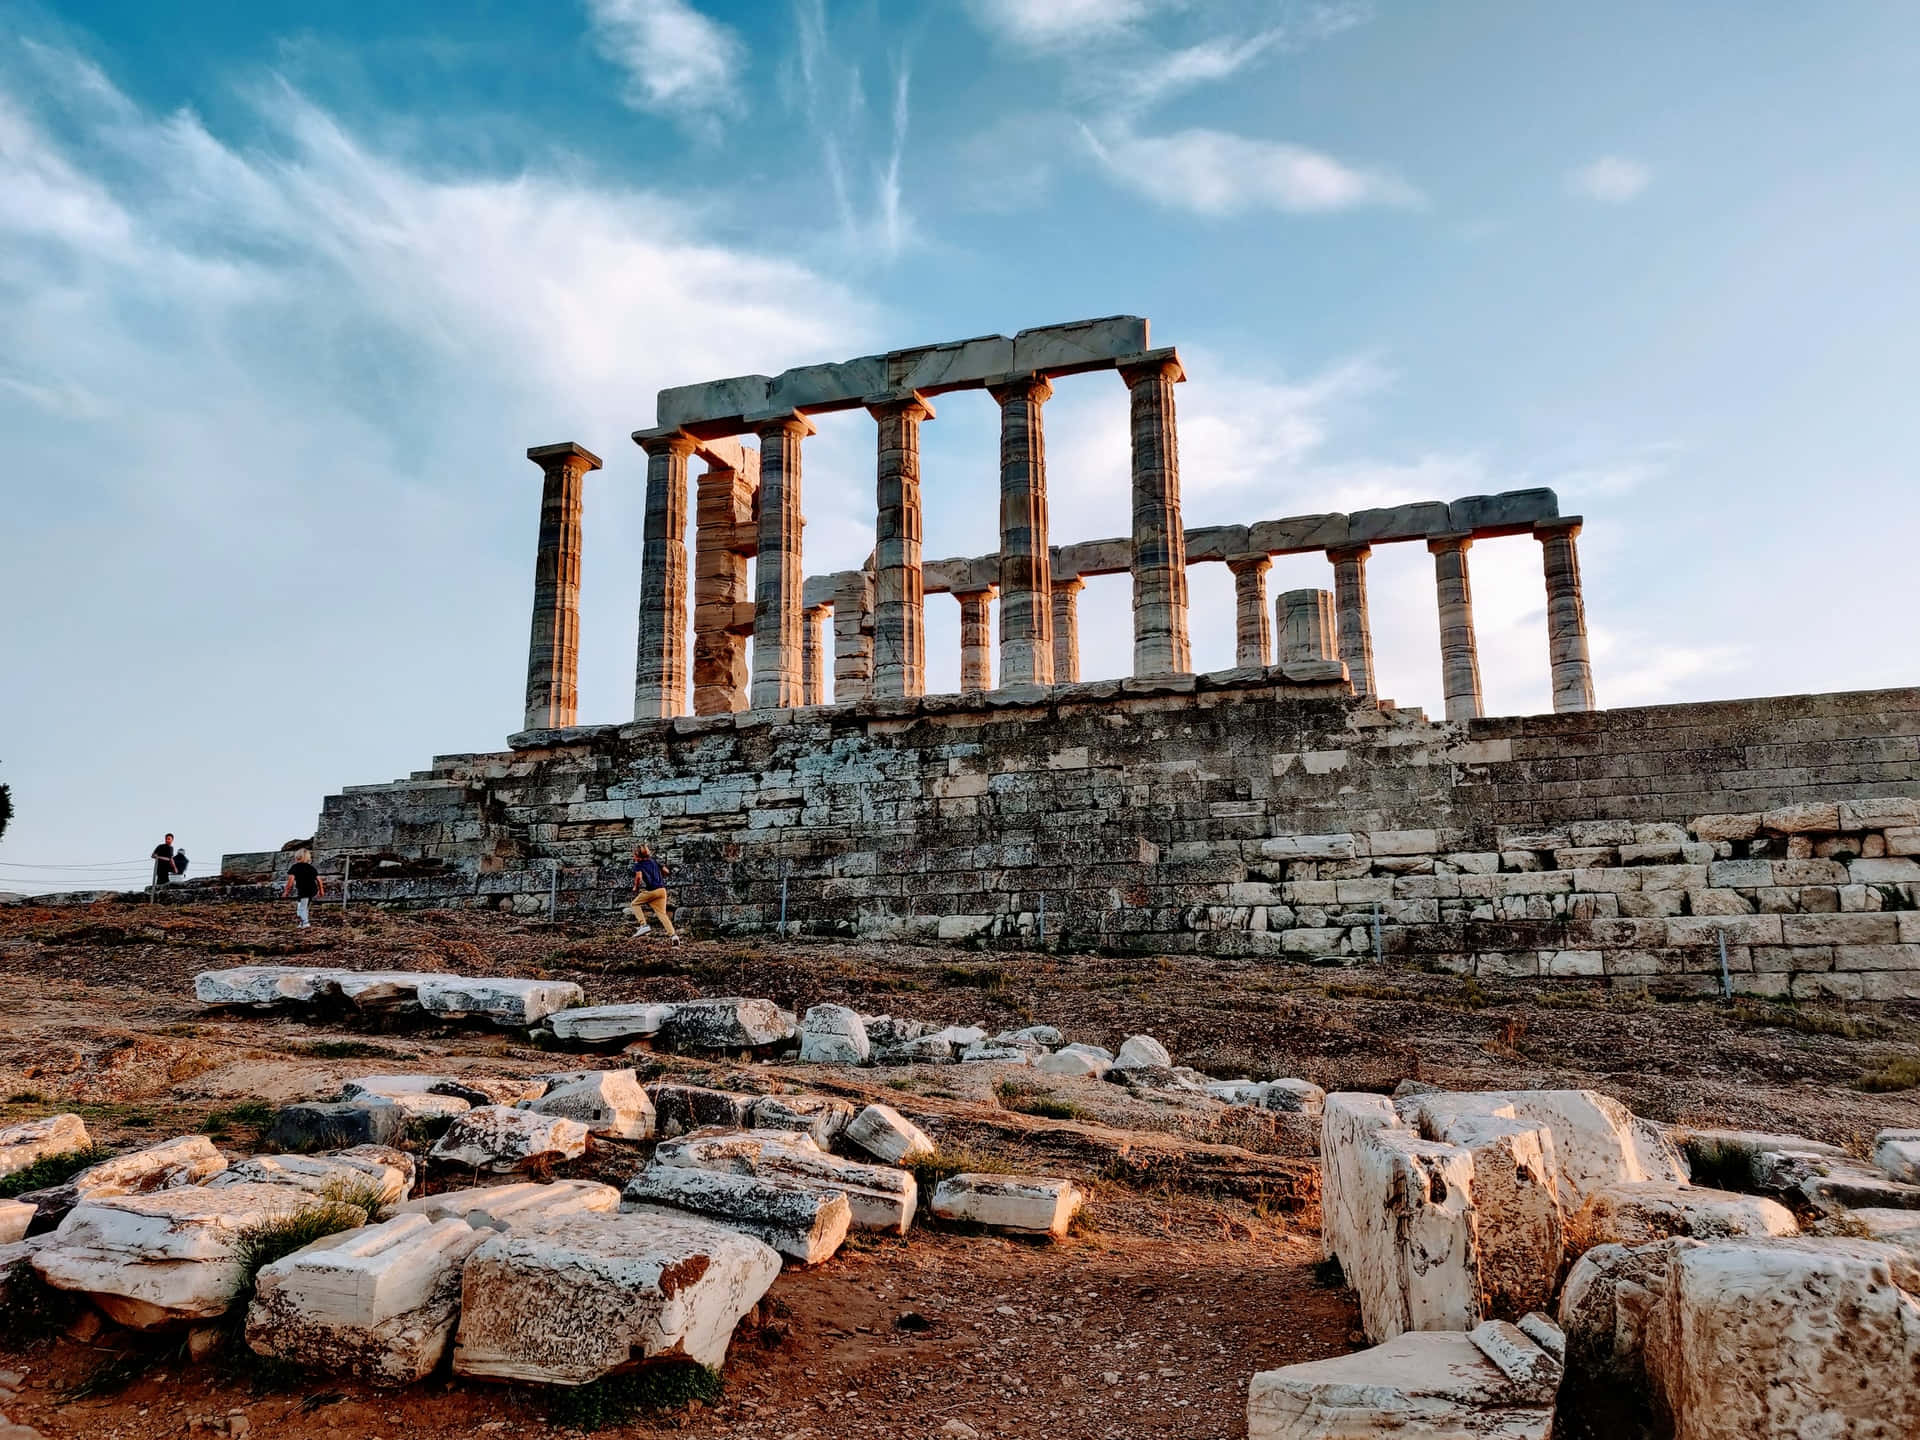 Praktfullastentempelpelare Sounion (note: This Is A Direct Translation And May Not Be The Most Commonly Used Phrasing In Swedish.) Wallpaper